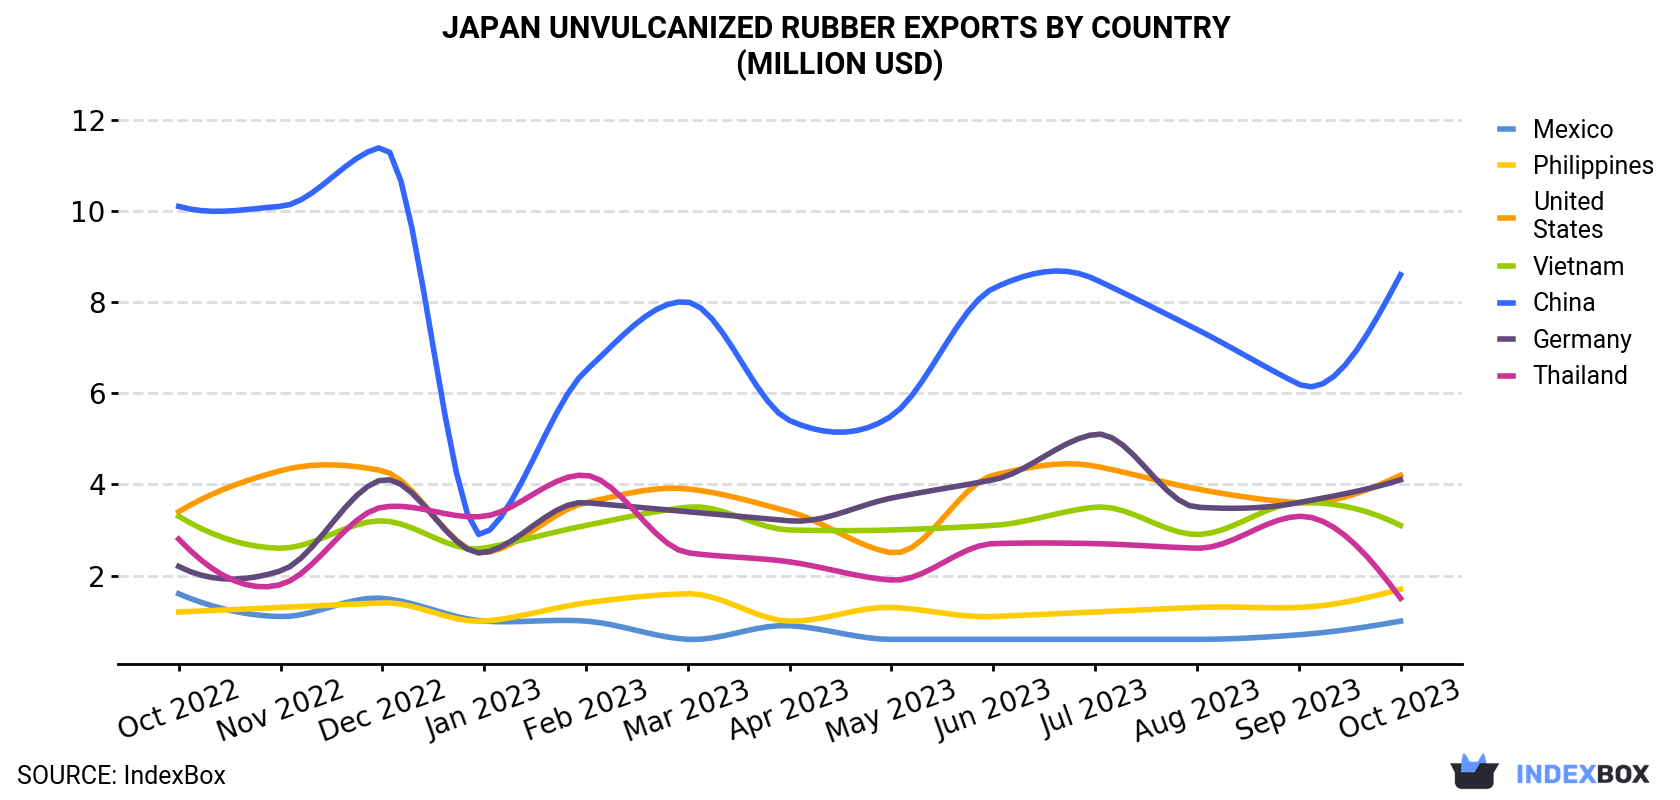 Japan Unvulcanized Rubber Exports By Country (Million USD)